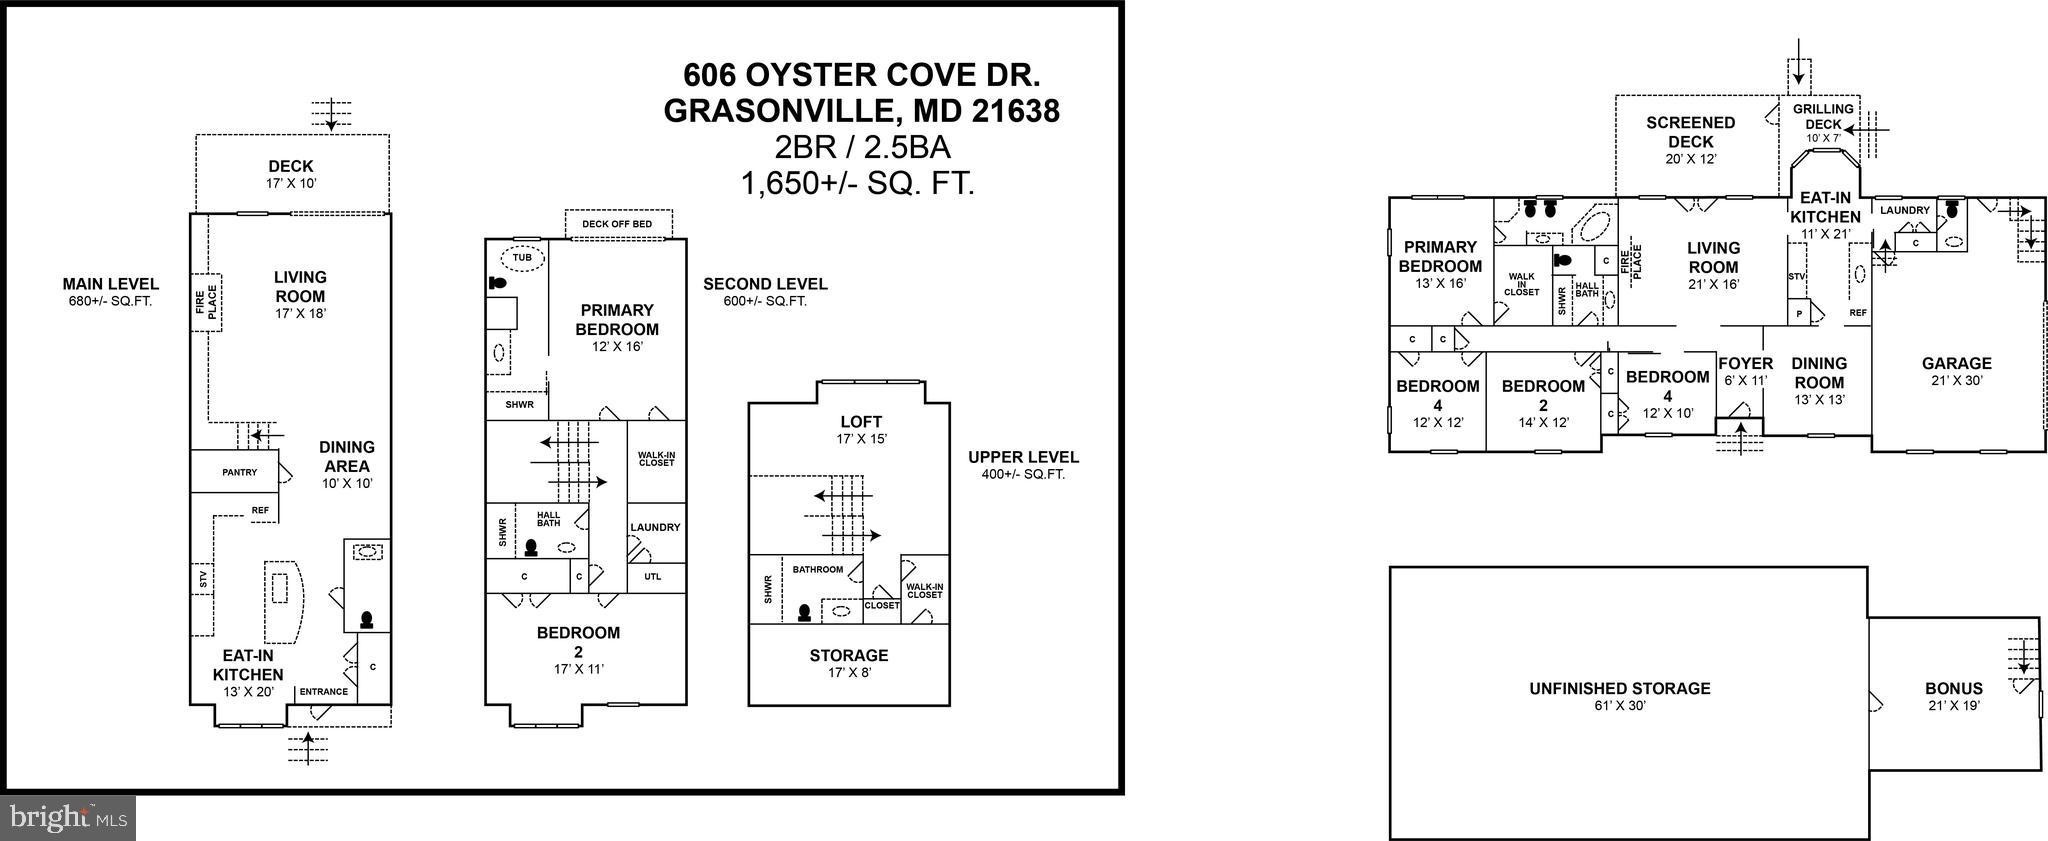 41. 606 Oyster Cove Drive